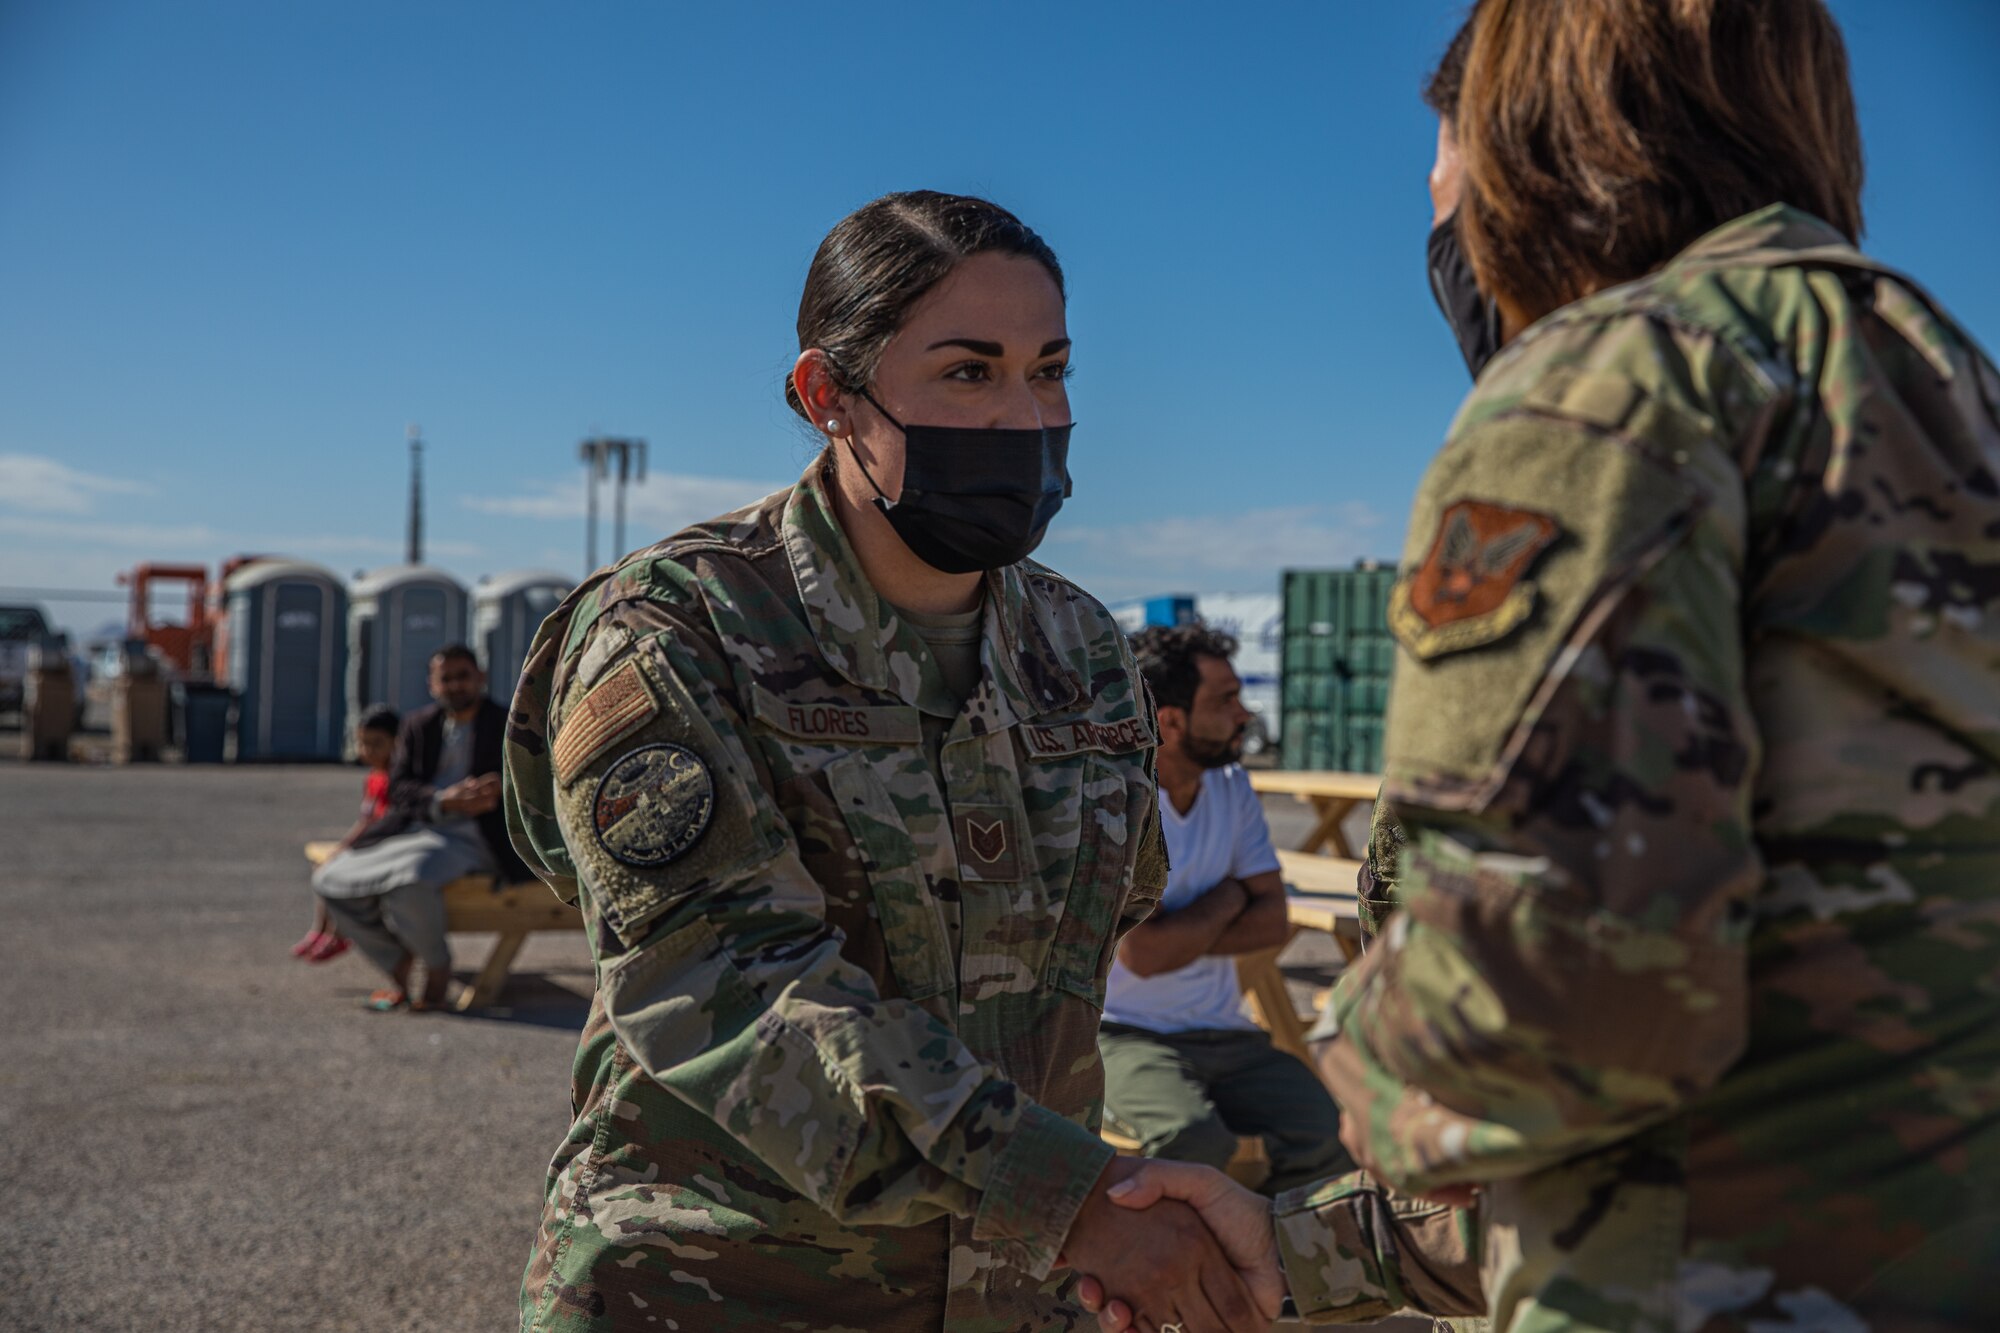 Chief Master Sgt. of the Air Force JoAnne S. Bass presents a coin to Tech. Sgt. April Flores, Task Force-Holloman noncommissioned officer in charge of immunizations deployed from Sheppard Air Force Base, Texas, on Holloman AFB, New Mexico, Oct. 13, 2021. The Department of Defense, through U.S. Northern Command, and in support of the Department of Homeland Security, is providing transportation, temporary housing, medical screening, and general support for at least 50,000 Afghan evacuees at suitable facilities, in permanent or temporary structures, as quickly as possible. This initiative provides Afghan personnel essential support at secure locations outside Afghanistan. (U.S. Army photo by Pfc. Anthony Sanchez)